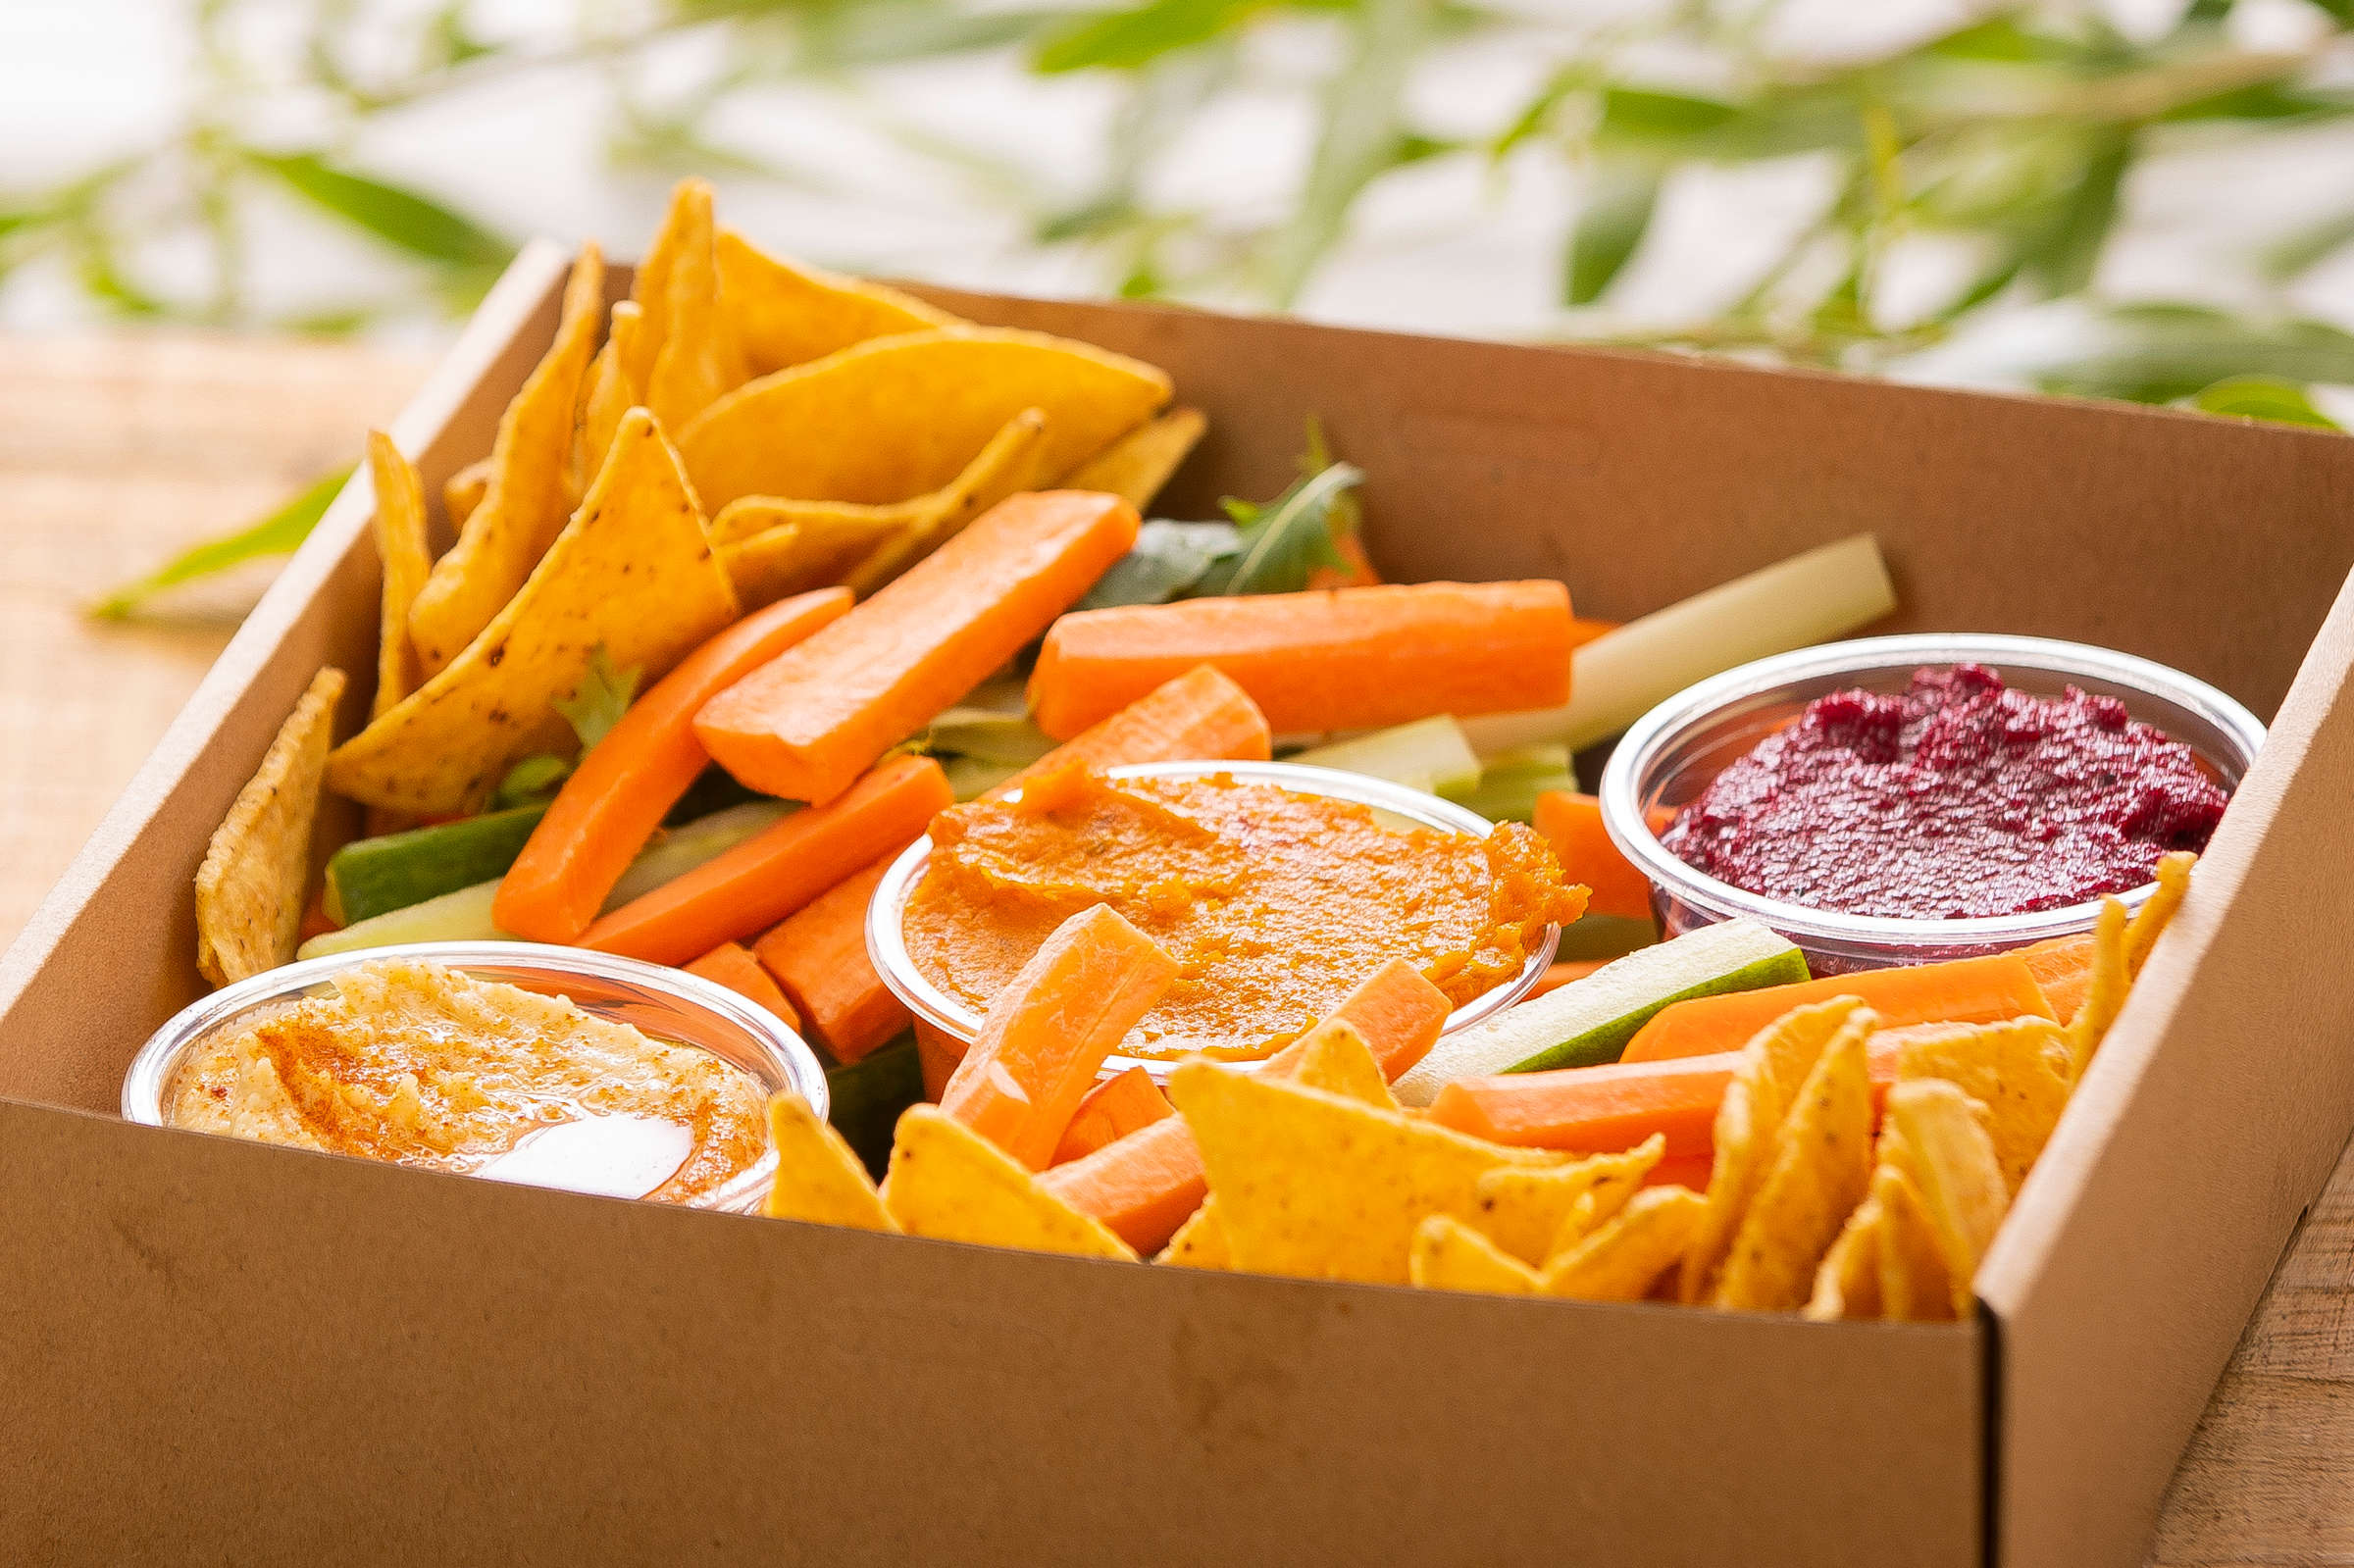 Dip and crudite catering box. Box pictured includes corn chips, carrot sticks, cucumber sticks, hummus, beetroot dip, and pumpkin and feta dips. Credit: Richard Jupe.